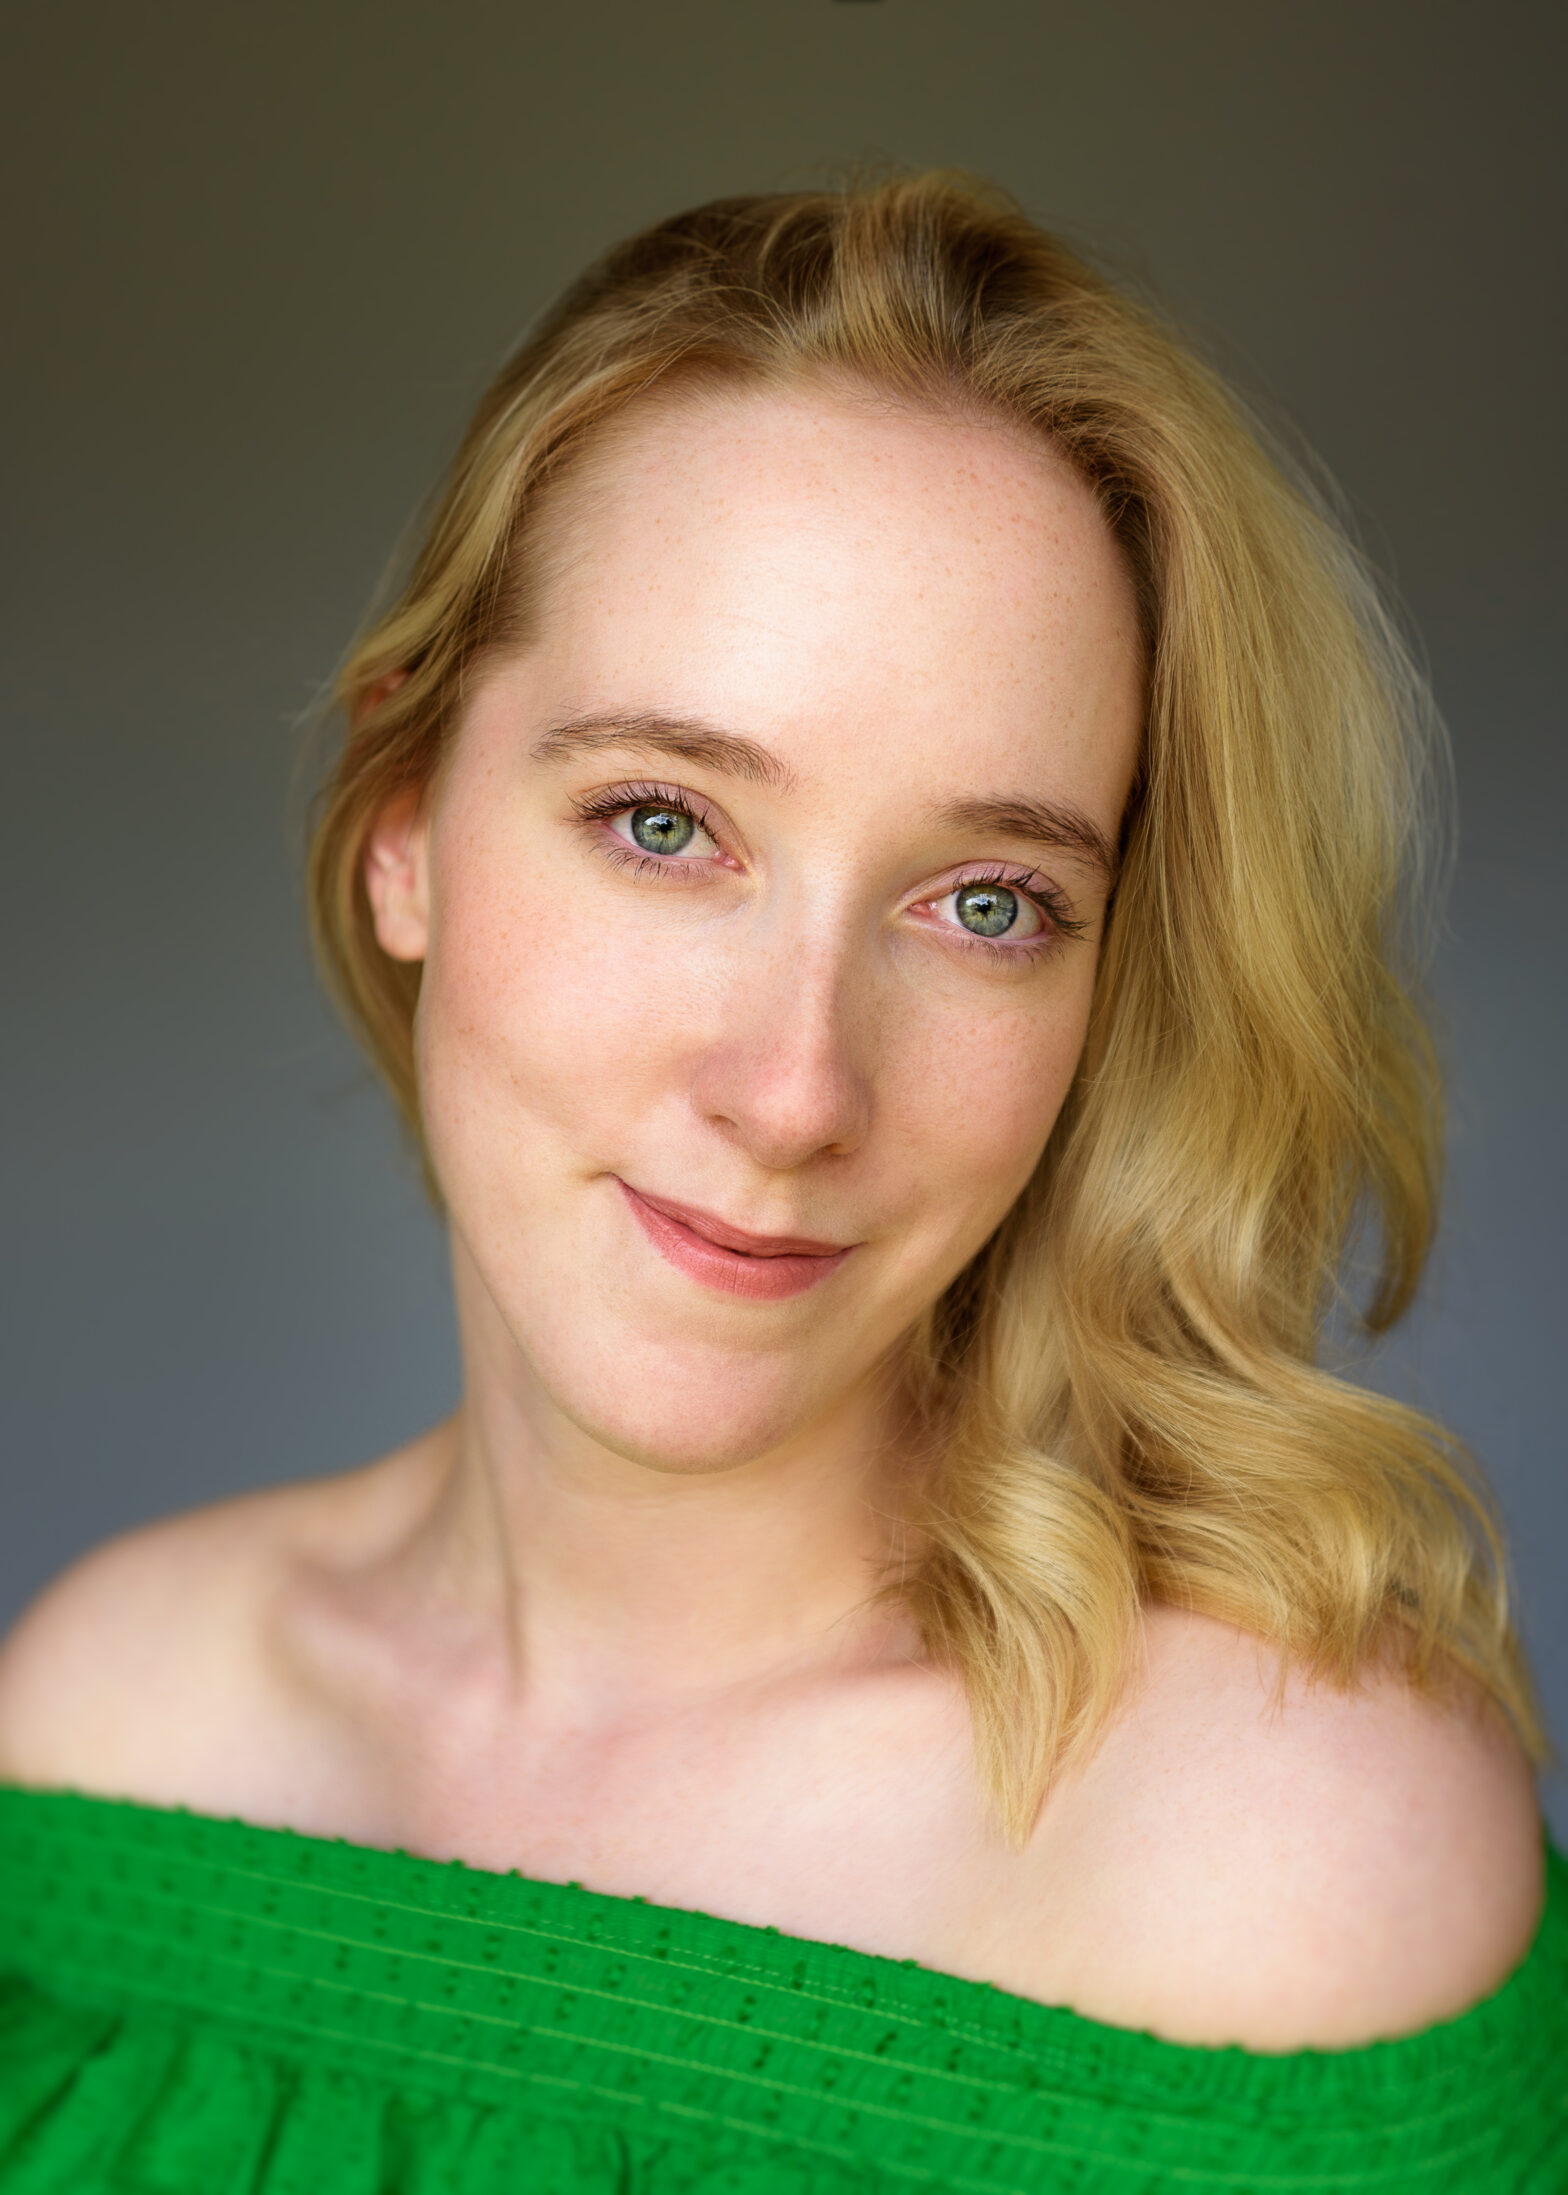 Headshot of a female artist with blonde hair curls, blue eyes and a green top.